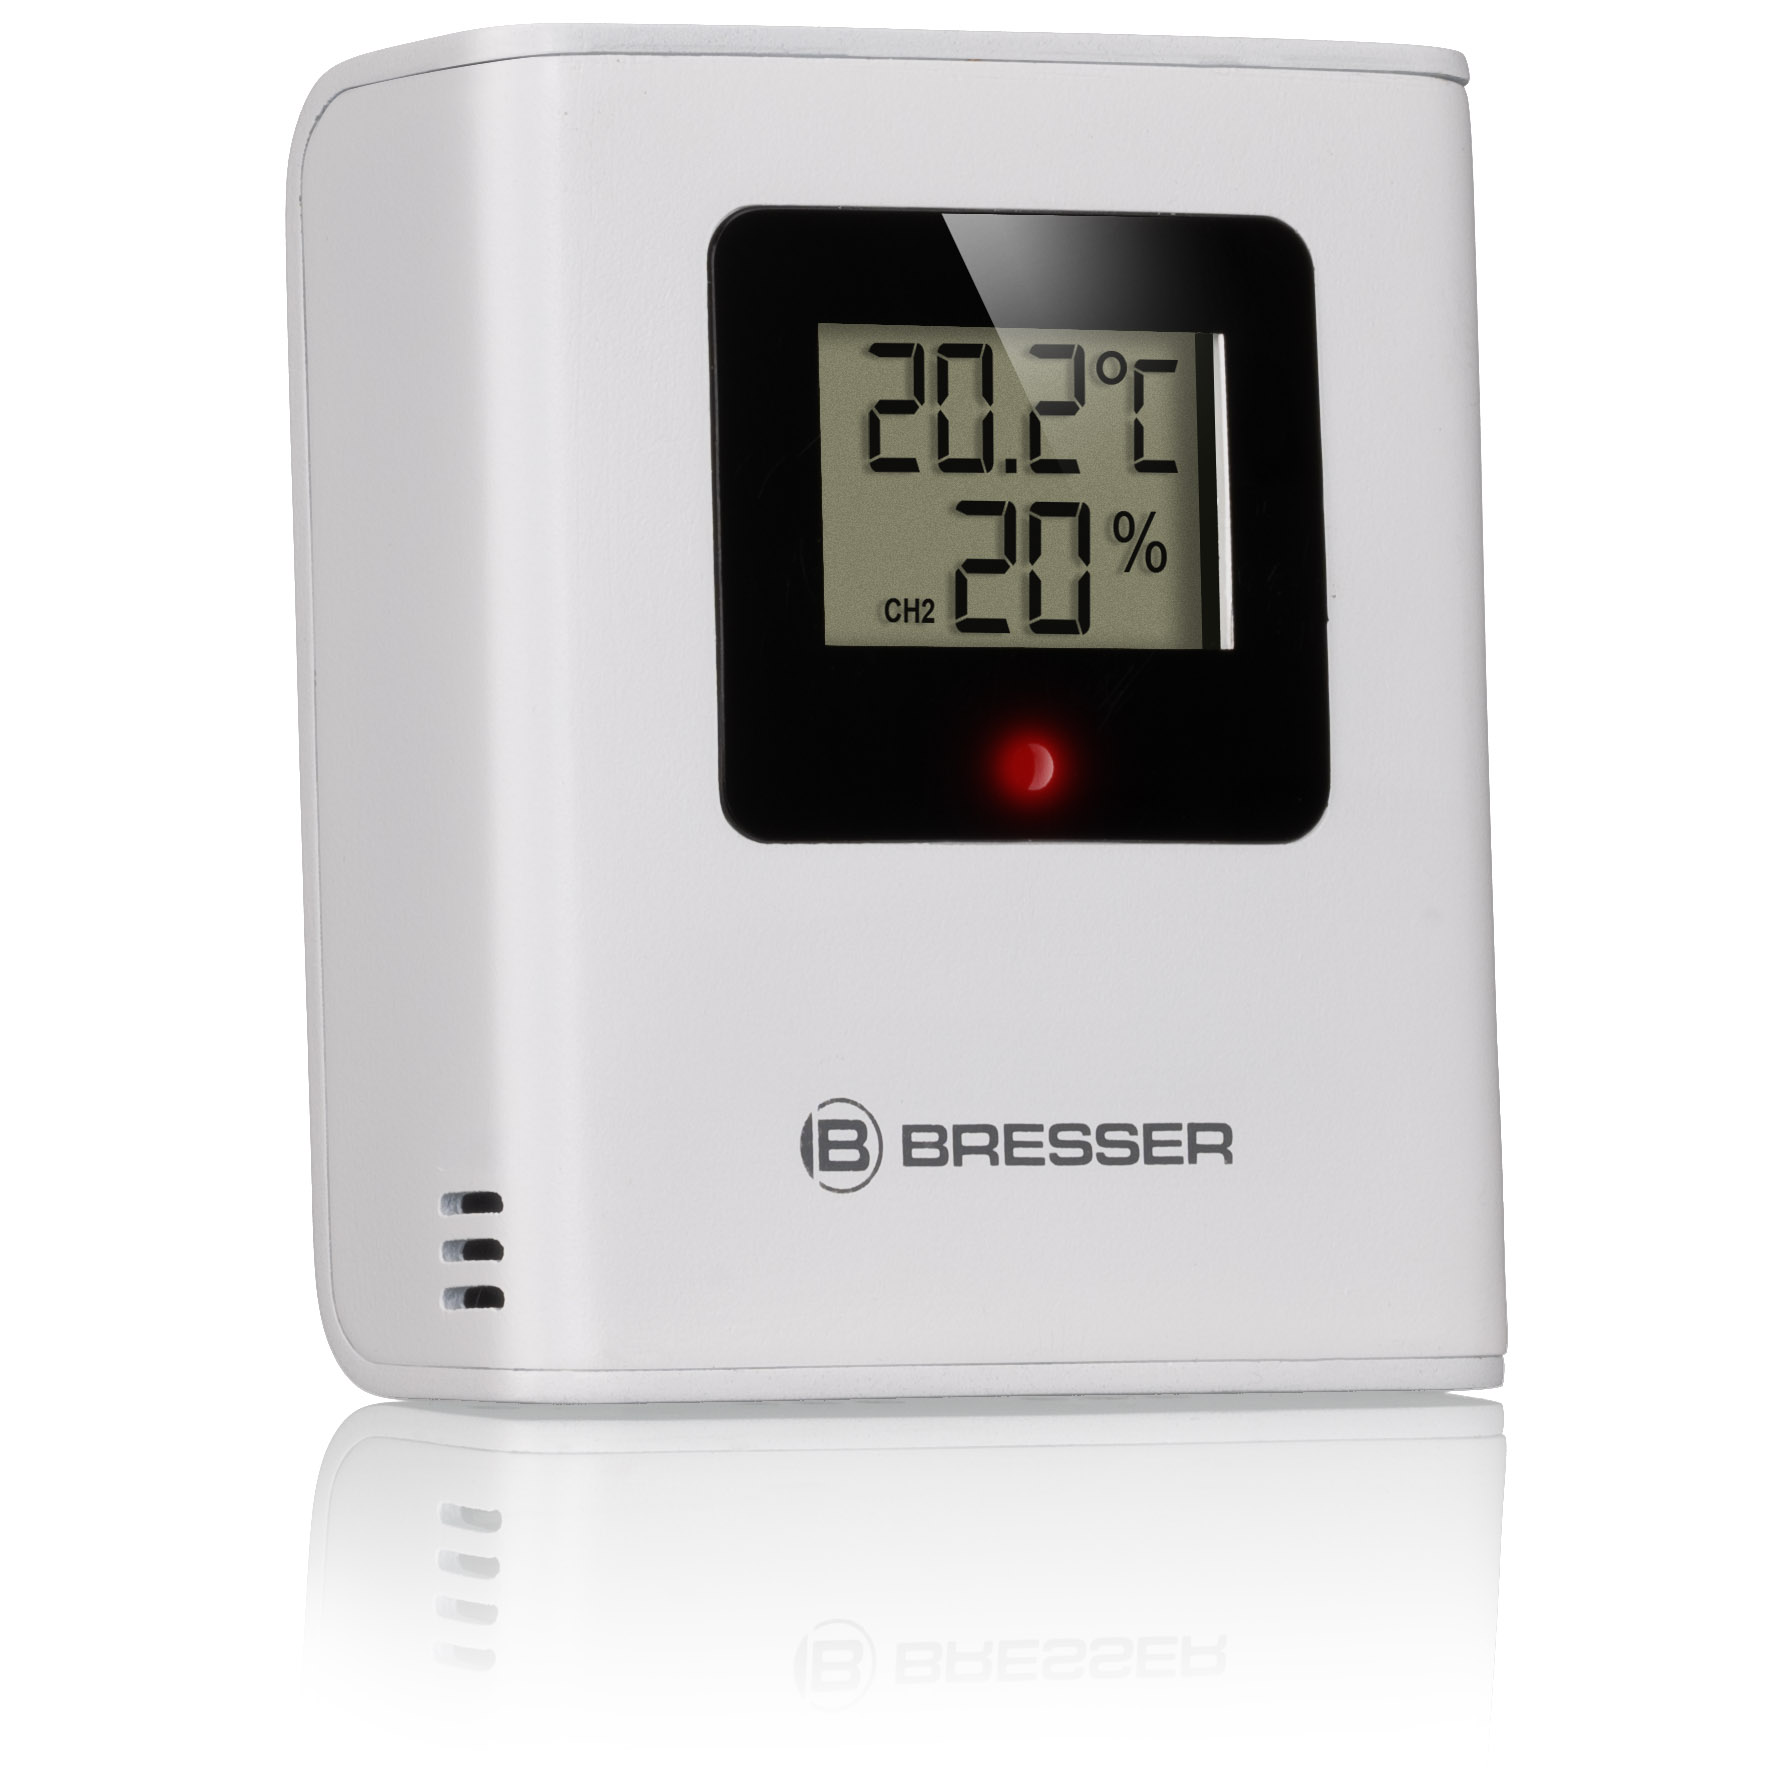 BRESSER Thermo-Hygrometer with Ventilation Recommendation VentAir V